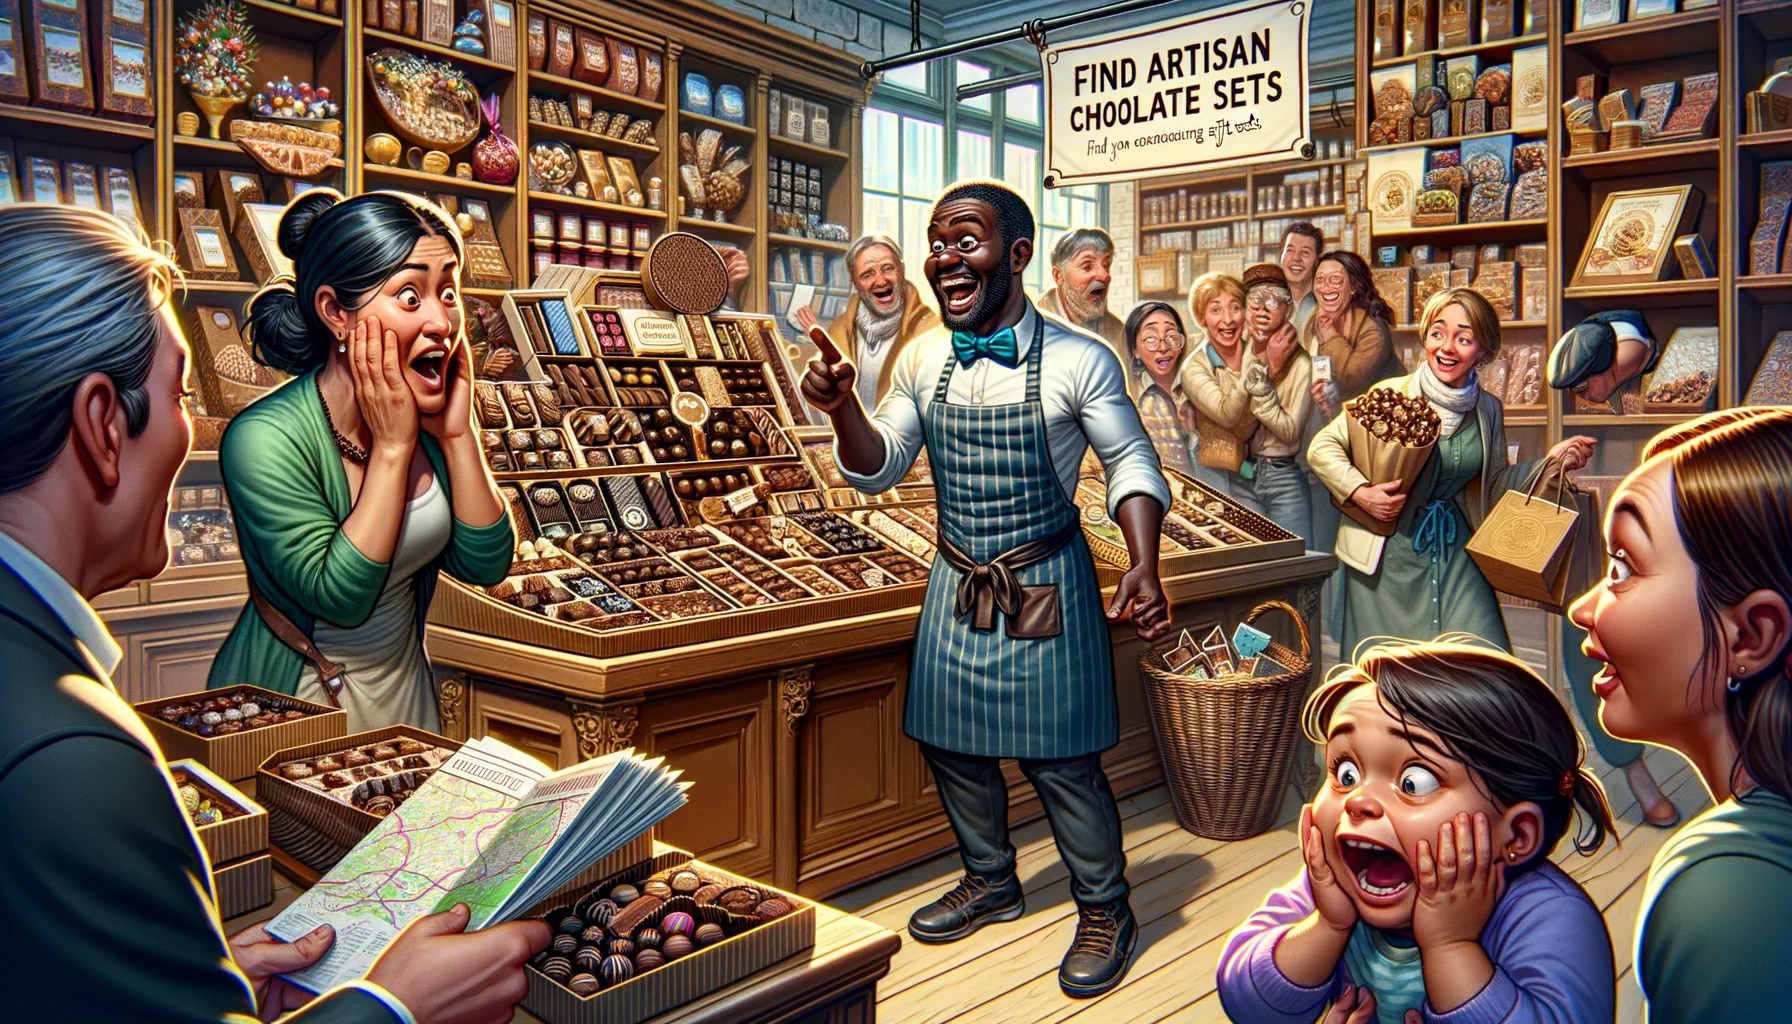 Imagine a comic scene in a bustling local market. A bewildered customer, a black man with a perplexed expression, is standing in front of a traditional chocolatier shop, bannered with a sign reading 'Find Artisan Chocolate Gift Sets'. A female chocolatier, of Asian descent, is standing behind the counter, displaying various tantalizing chocolate gift sets. She is chuckling and pointing towards a particularly extravagant set on the top shelf. The shelves behind her are filled with a dazzling assortment of hand-crafted chocolates, with ribbons and exquisite packaging. In the foreground, a white child with wide eyes and a dropped jaw can be seen peering at the chocolates, clutching her mother's hand, a Hispanic woman who is trying to manage a map and a shopping list simultaneously.